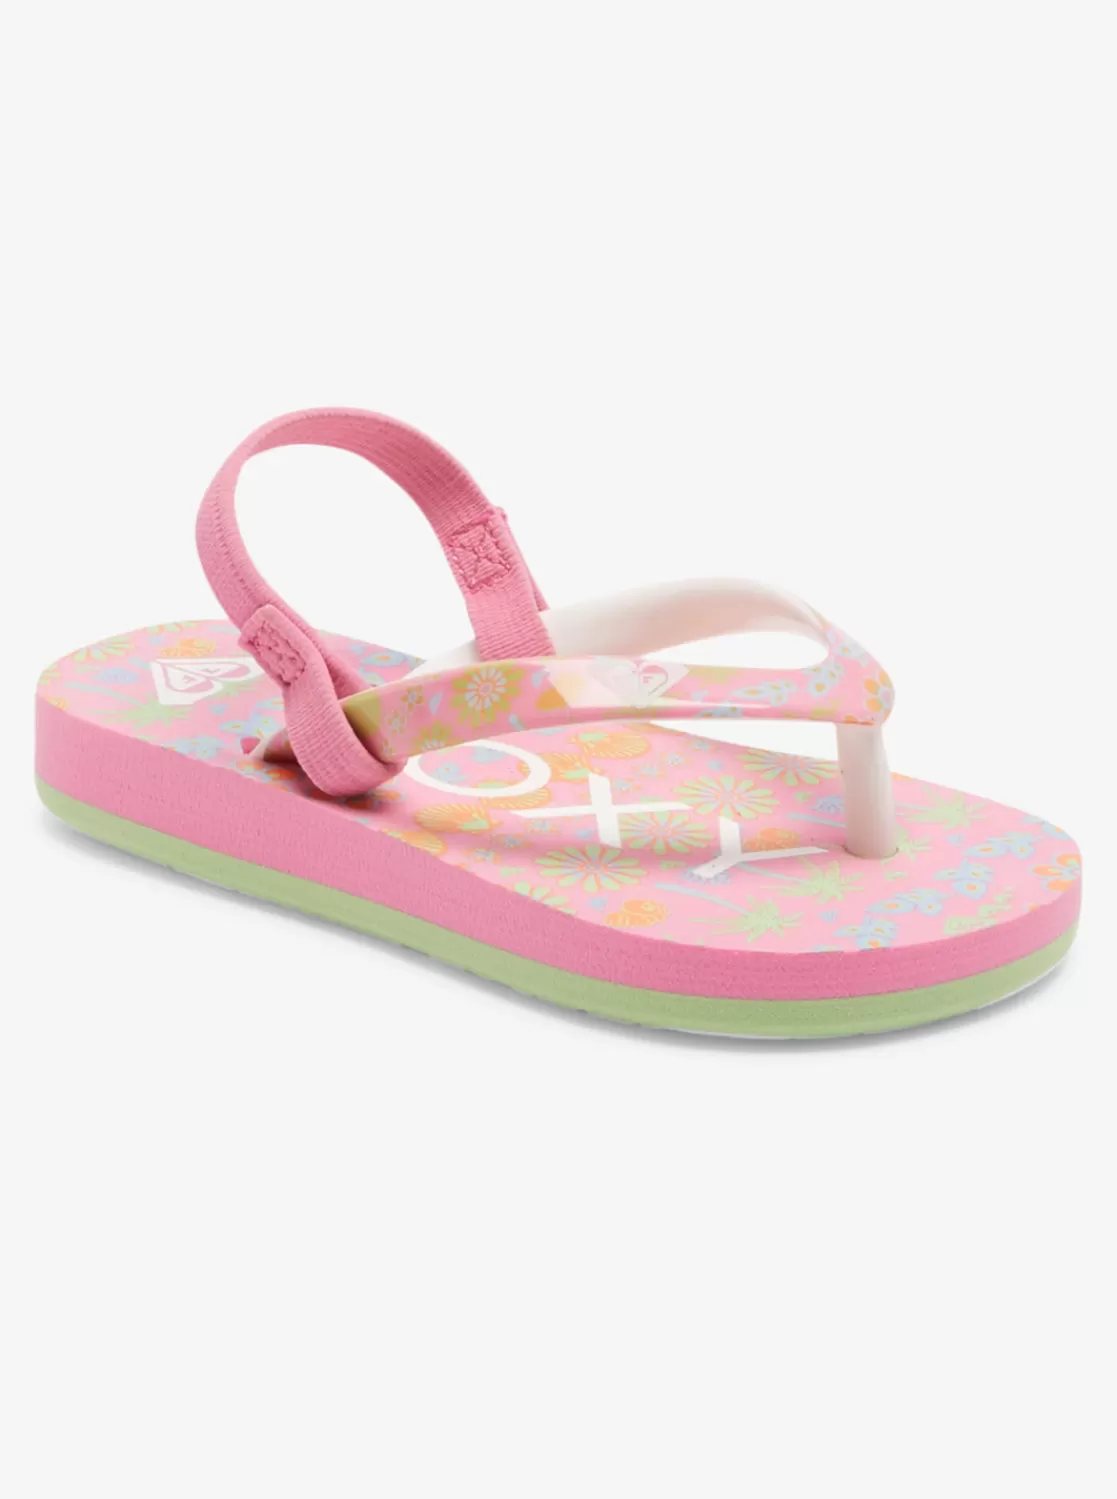 Toddler's Pebbles Sandals-ROXY Hot